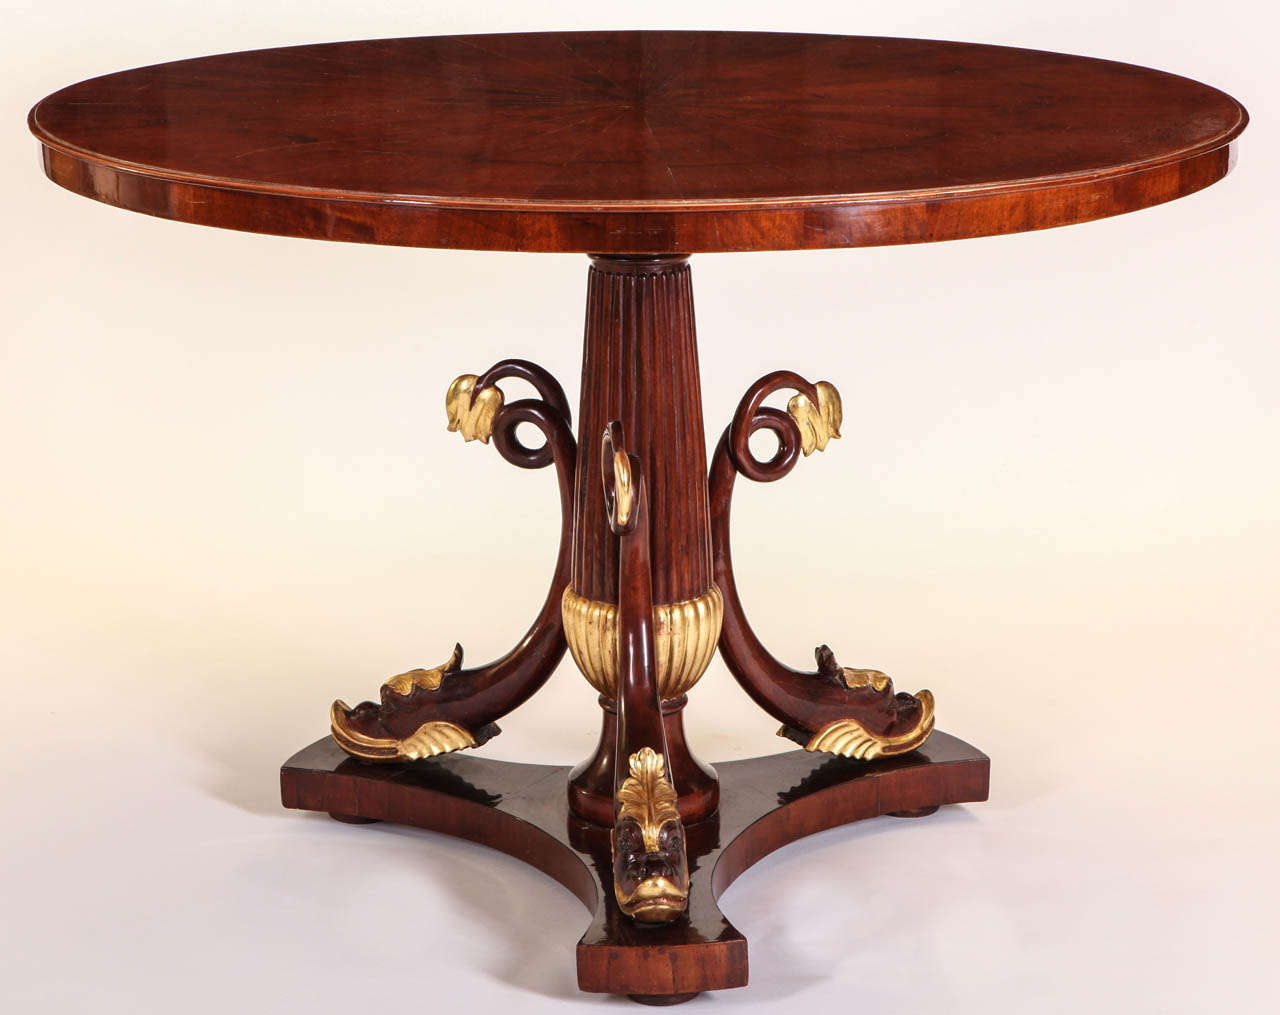 An Italian mahogany and parcel-gilt center table with a circular top above triple addorsed dolphins on a triform base,

Tuscany, 1830.